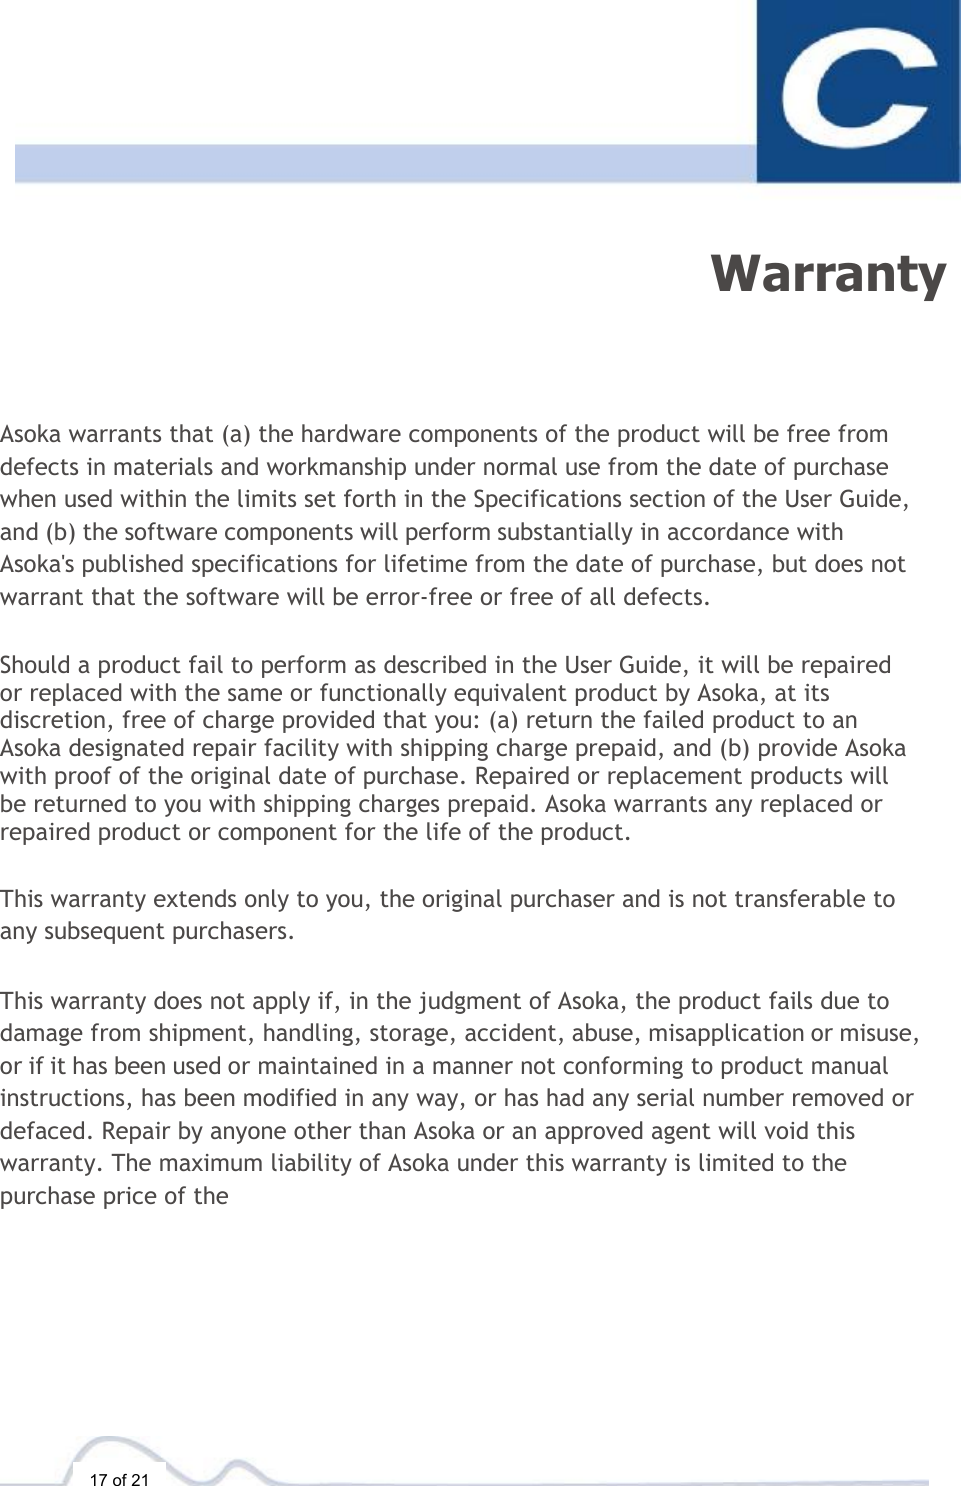  17 of 21  Warranty Asoka warrants that (a) the hardware components of the product will be free from defects in materials and workmanship under normal use from the date of purchase when used within the limits set forth in the Specifications section of the User Guide, and (b) the software components will perform substantially in accordance with Asoka&apos;s published specifications for lifetime from the date of purchase, but does not warrant that the software will be error-free or free of all defects.  Should a product fail to perform as described in the User Guide, it will be repaired or replaced with the same or functionally equivalent product by Asoka, at its discretion, free of charge provided that you: (a) return the failed product to an Asoka designated repair facility with shipping charge prepaid, and (b) provide Asoka with proof of the original date of purchase. Repaired or replacement products will be returned to you with shipping charges prepaid. Asoka warrants any replaced or repaired product or component for the life of the product.   This warranty extends only to you, the original purchaser and is not transferable to any subsequent purchasers.  This warranty does not apply if, in the judgment of Asoka, the product fails due to damage from shipment, handling, storage, accident, abuse, misapplication or misuse, or if it has been used or maintained in a manner not conforming to product manual instructions, has been modified in any way, or has had any serial number removed or defaced. Repair by anyone other than Asoka or an approved agent will void this warranty. The maximum liability of Asoka under this warranty is limited to the purchase price of the 